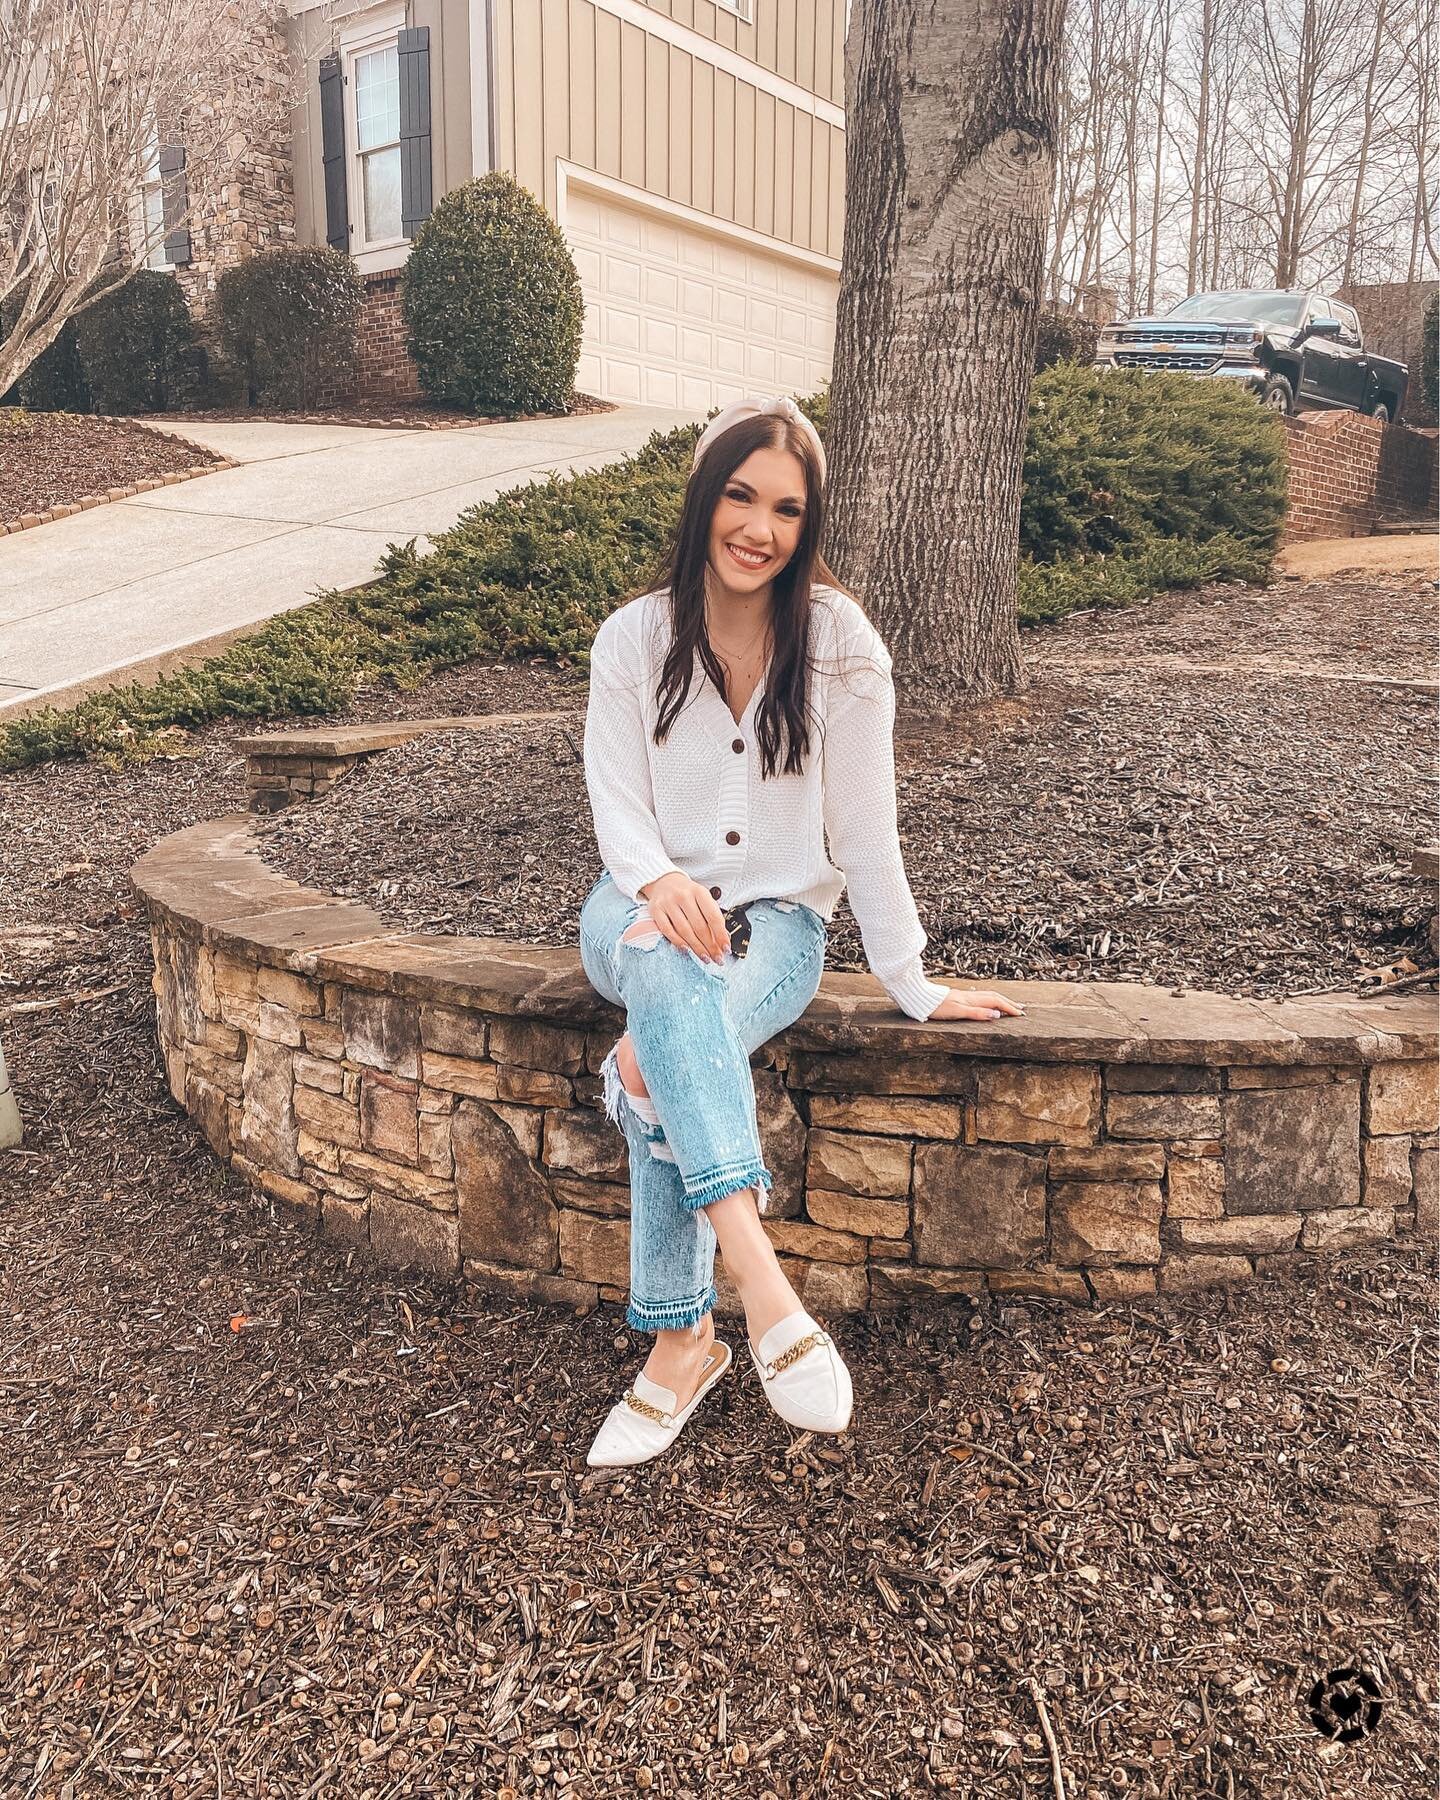 I was on clubhouse this weekend (add me-mollyhein) and someone asked me how I take all my pictures. Swipe for my photographer and lighting model. Let me know if you want his outfit deets 😂 I posted some at home Valentine&rsquo;s Day ideas on stories